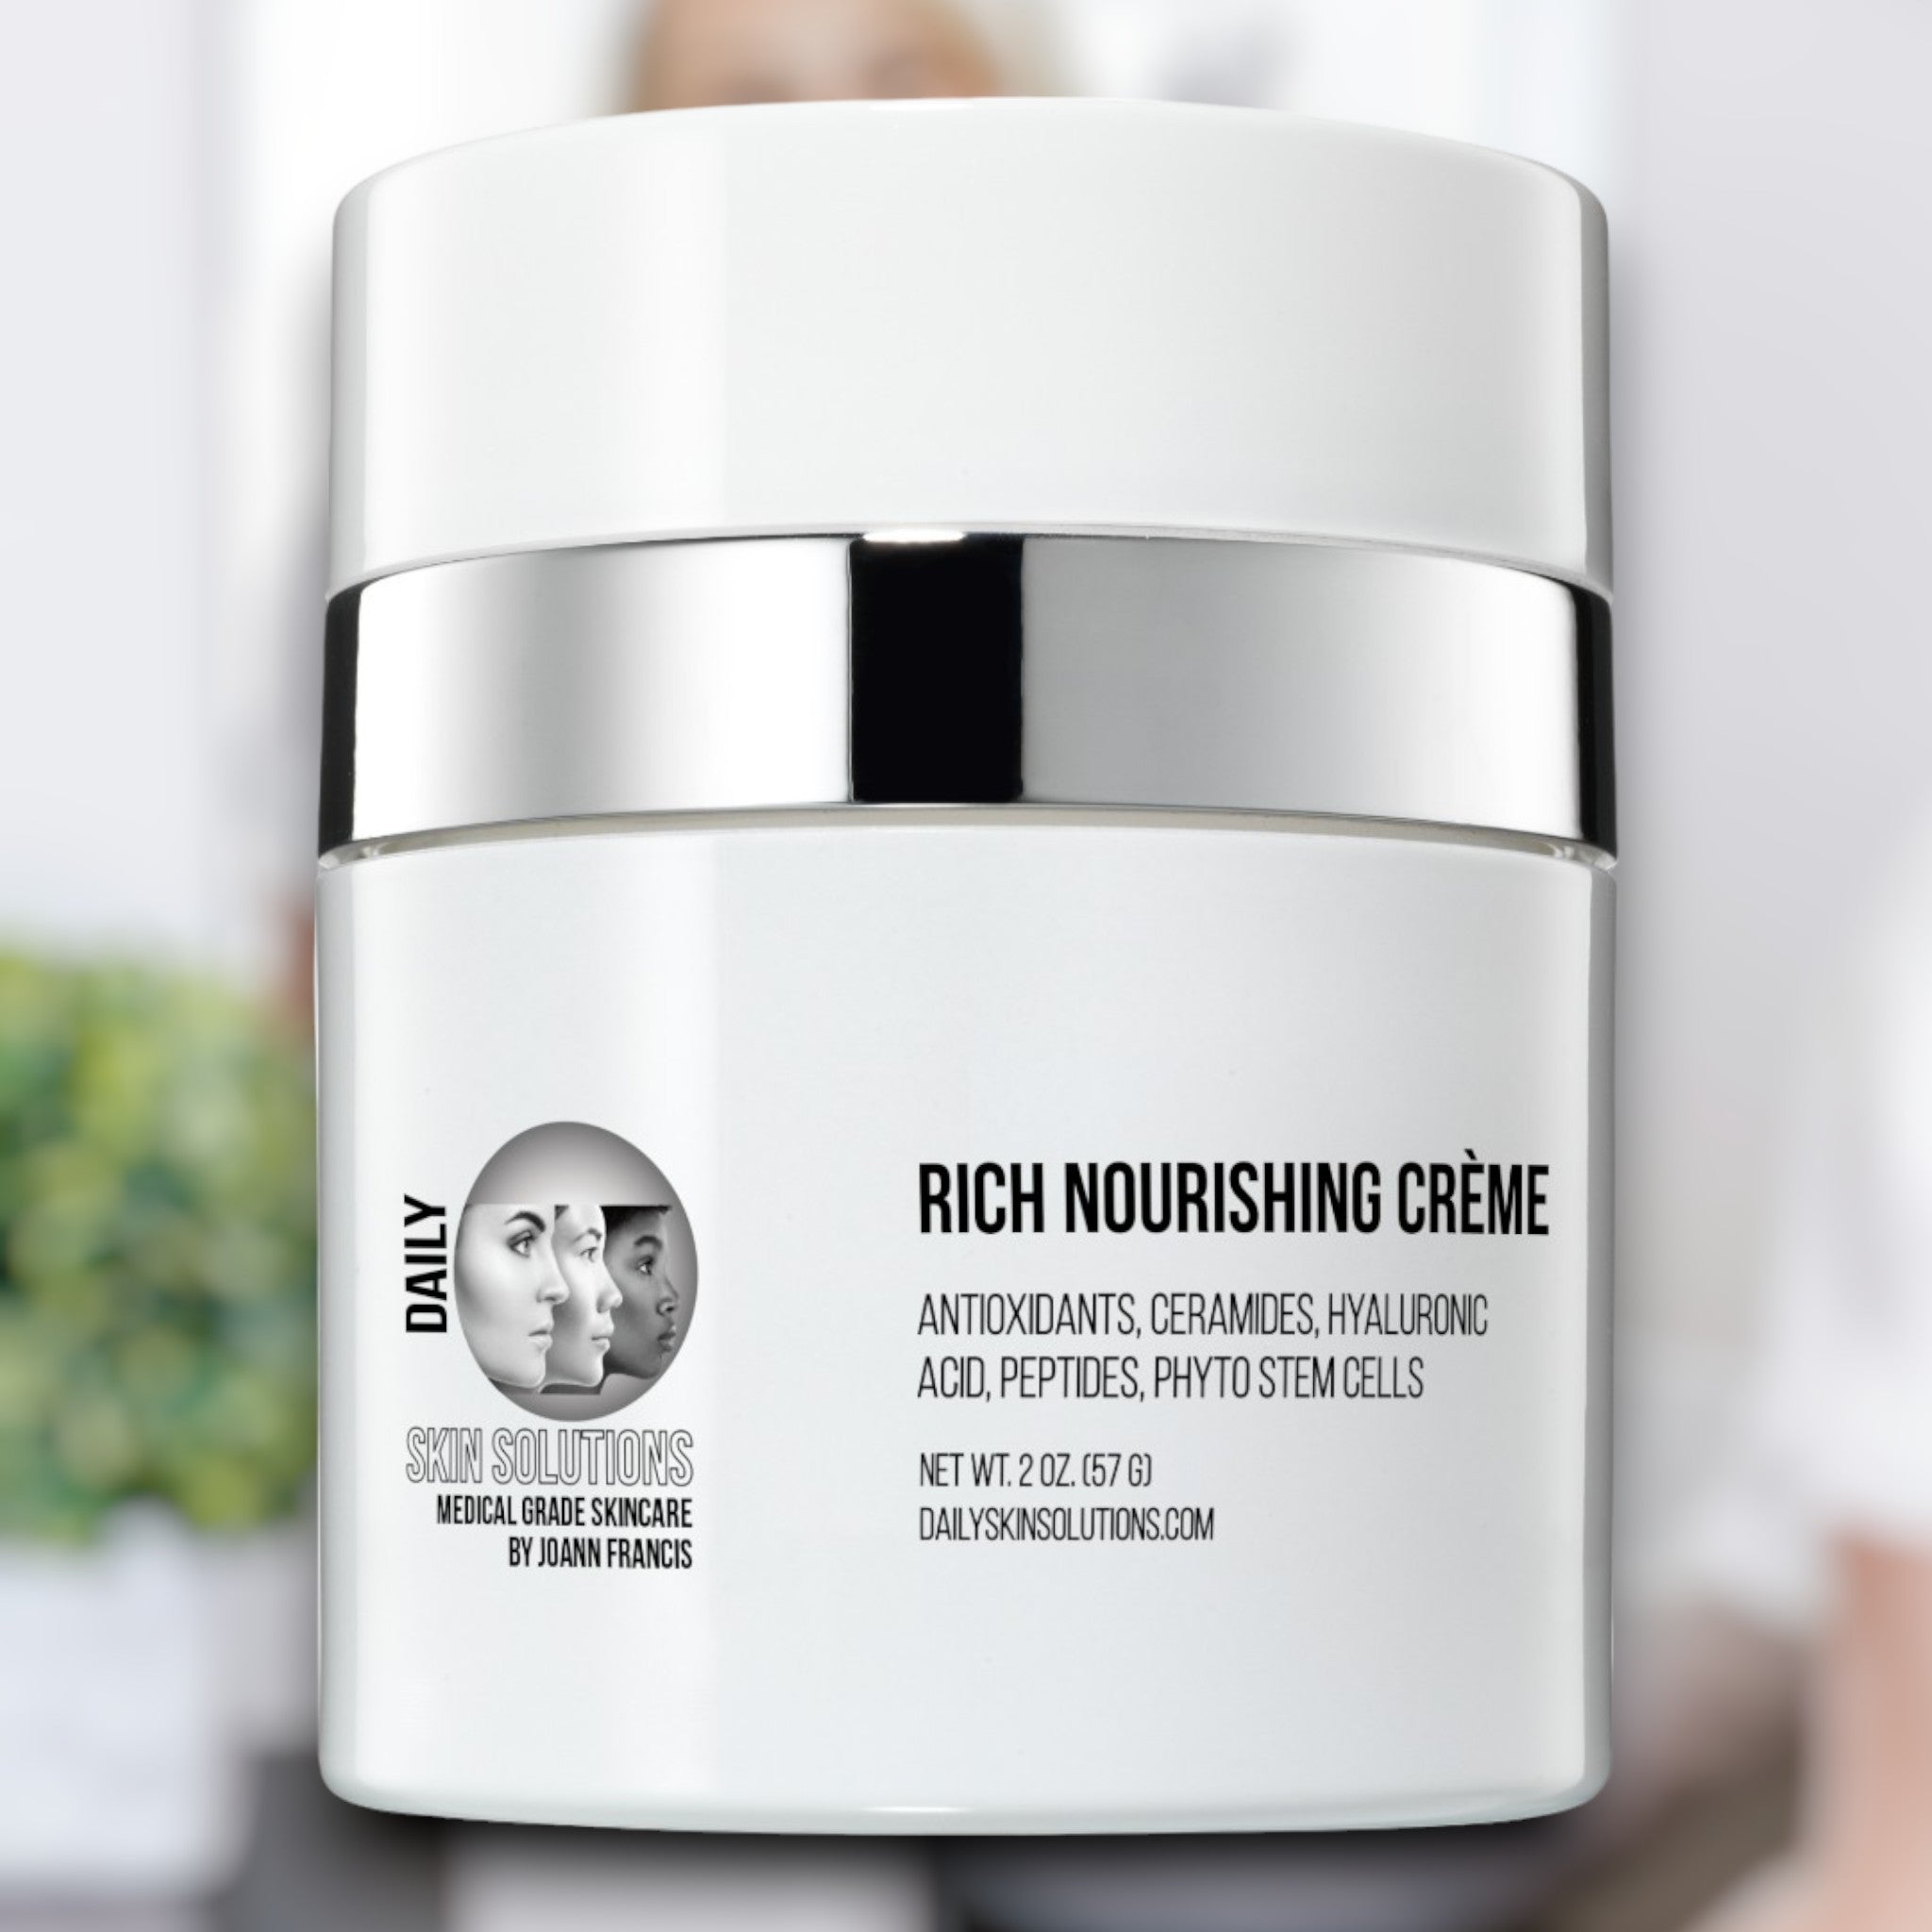 Rich Nourishing Creme by Daily Skin Solutions for hydrating dry skin